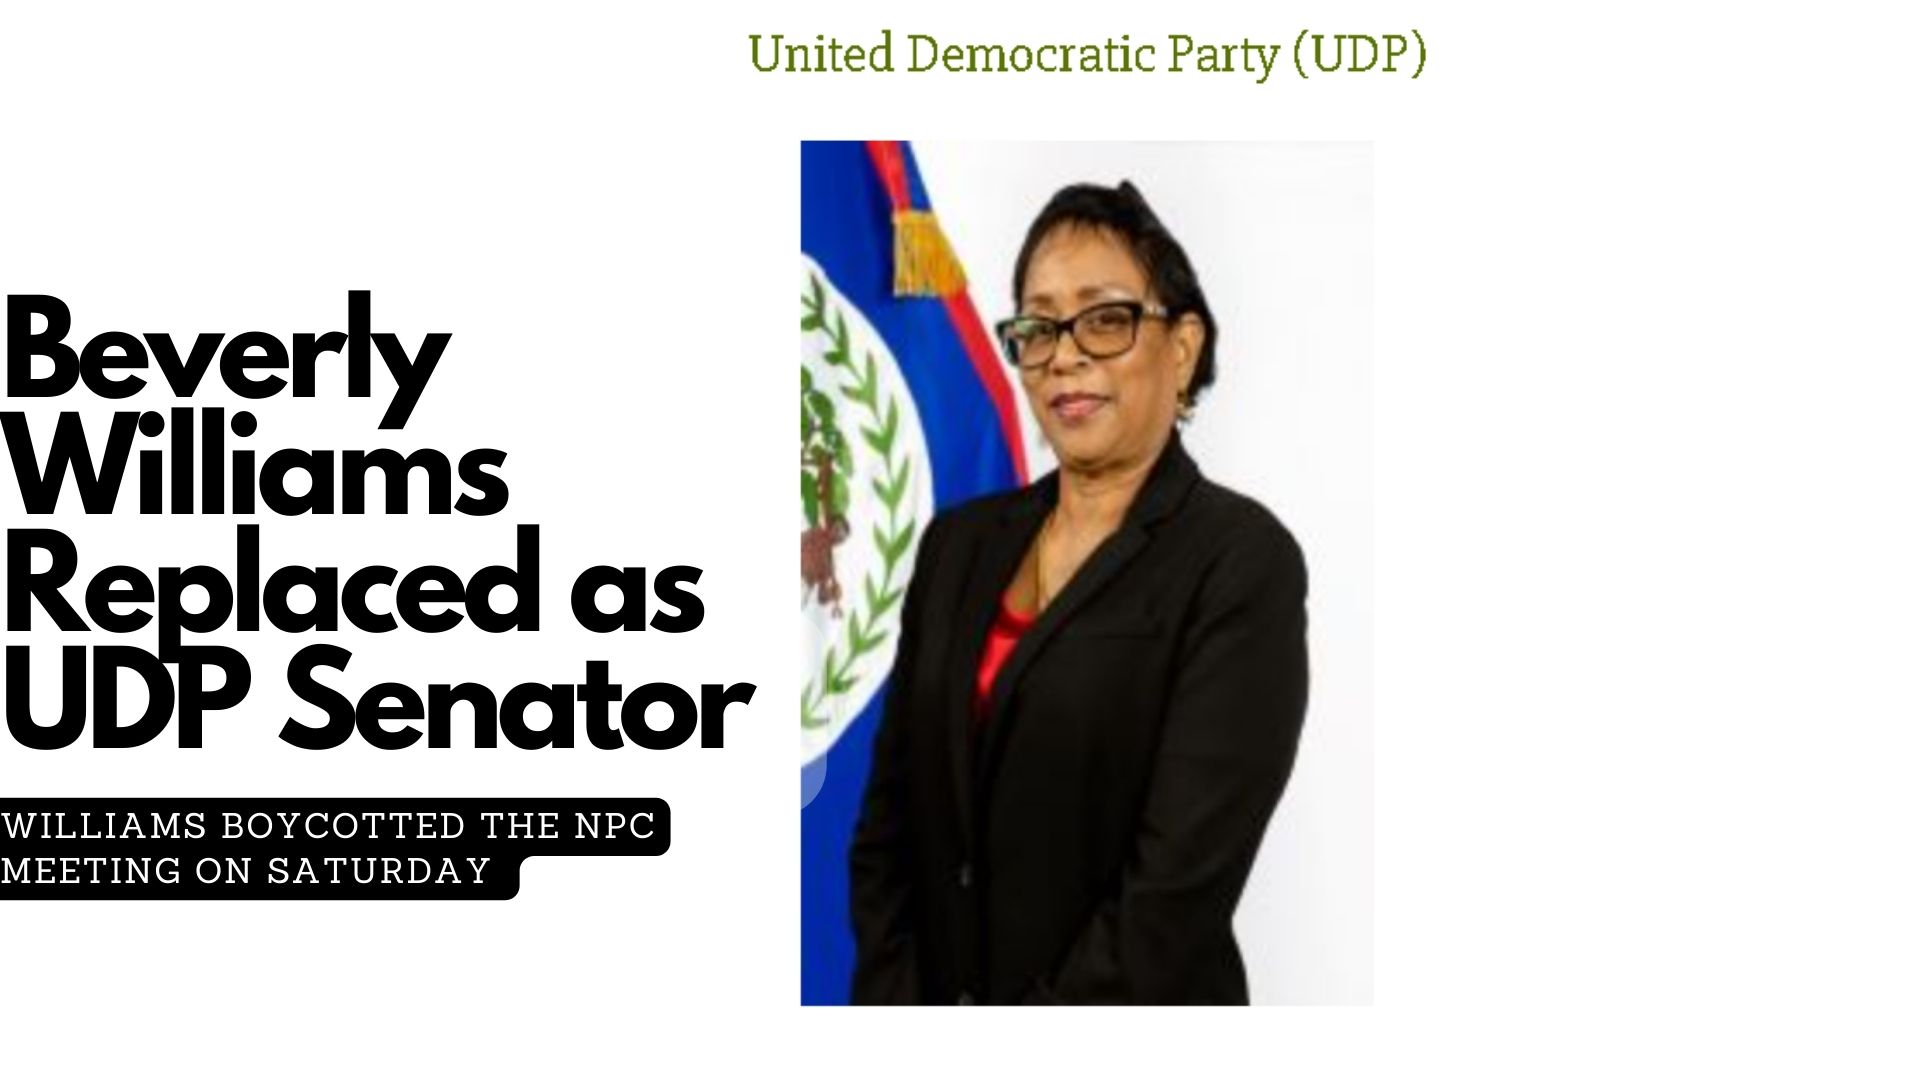 Beverly Williams Replaced as UDP Senator